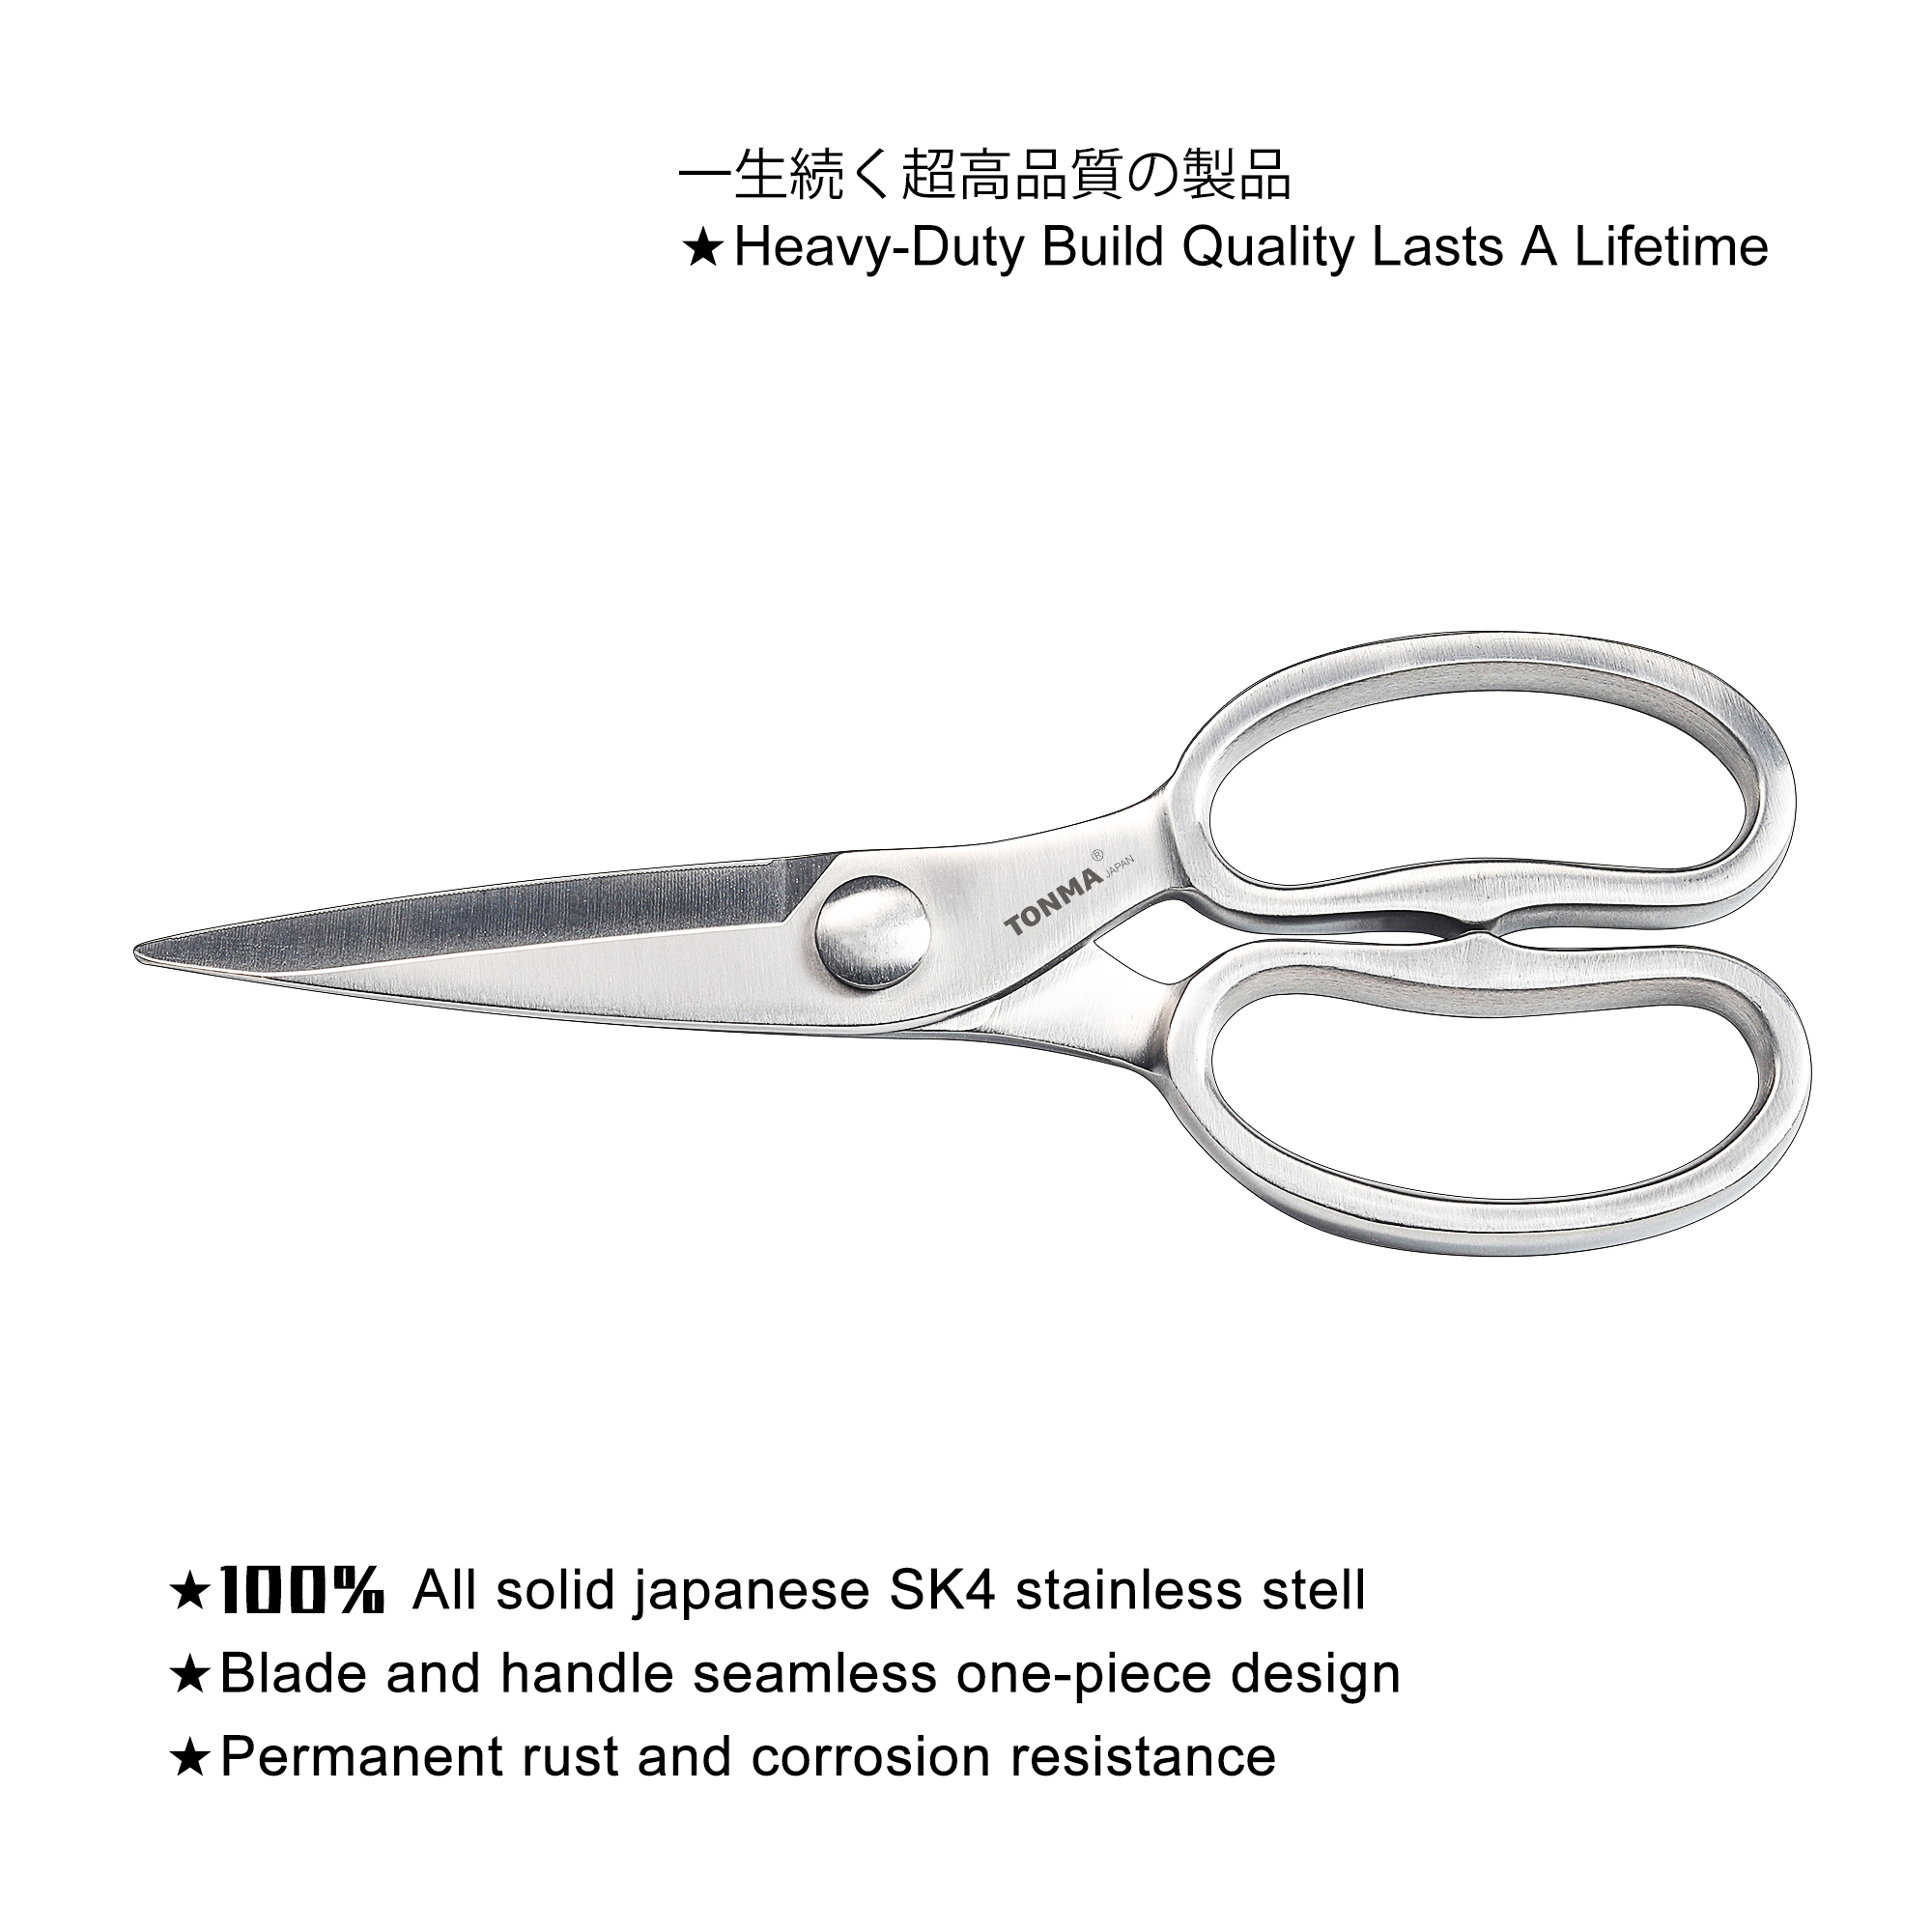 TONMA Kitchen Shears Heavy Duty [Made in Japan] 9.5” Sharp Stainless Steel Come  Apart Kitchen Scissors All Purpose, Ergonomic Right Handled (TKS-2) -  TONMA® Japan